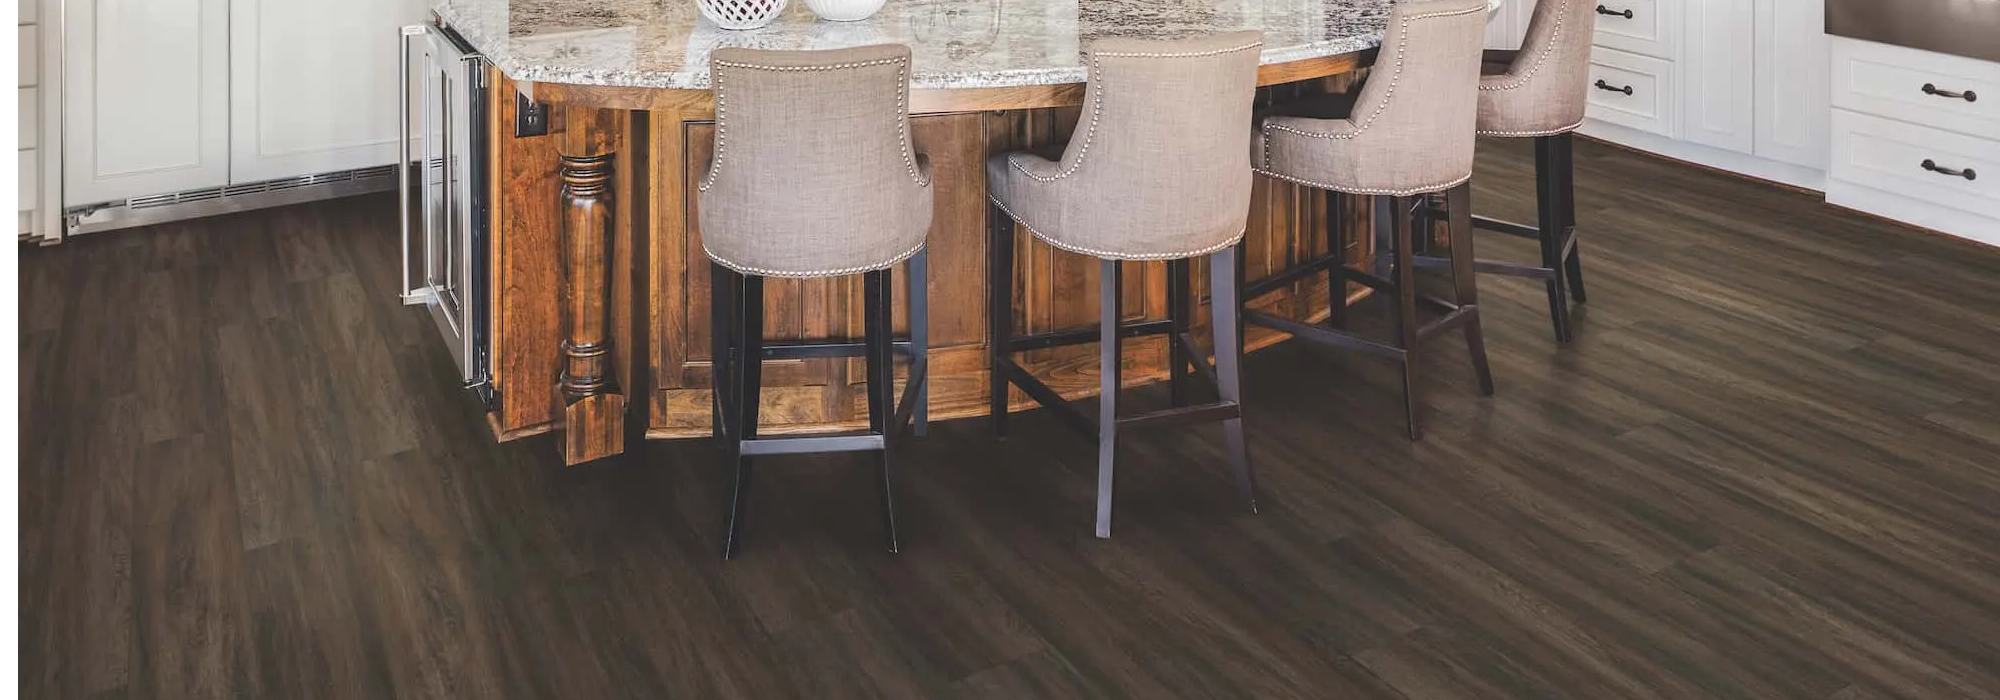 Image of Dark Hardwood Flooring Offered at Kaoud Rugs and Carpet in West Hartford and Manchester, CT